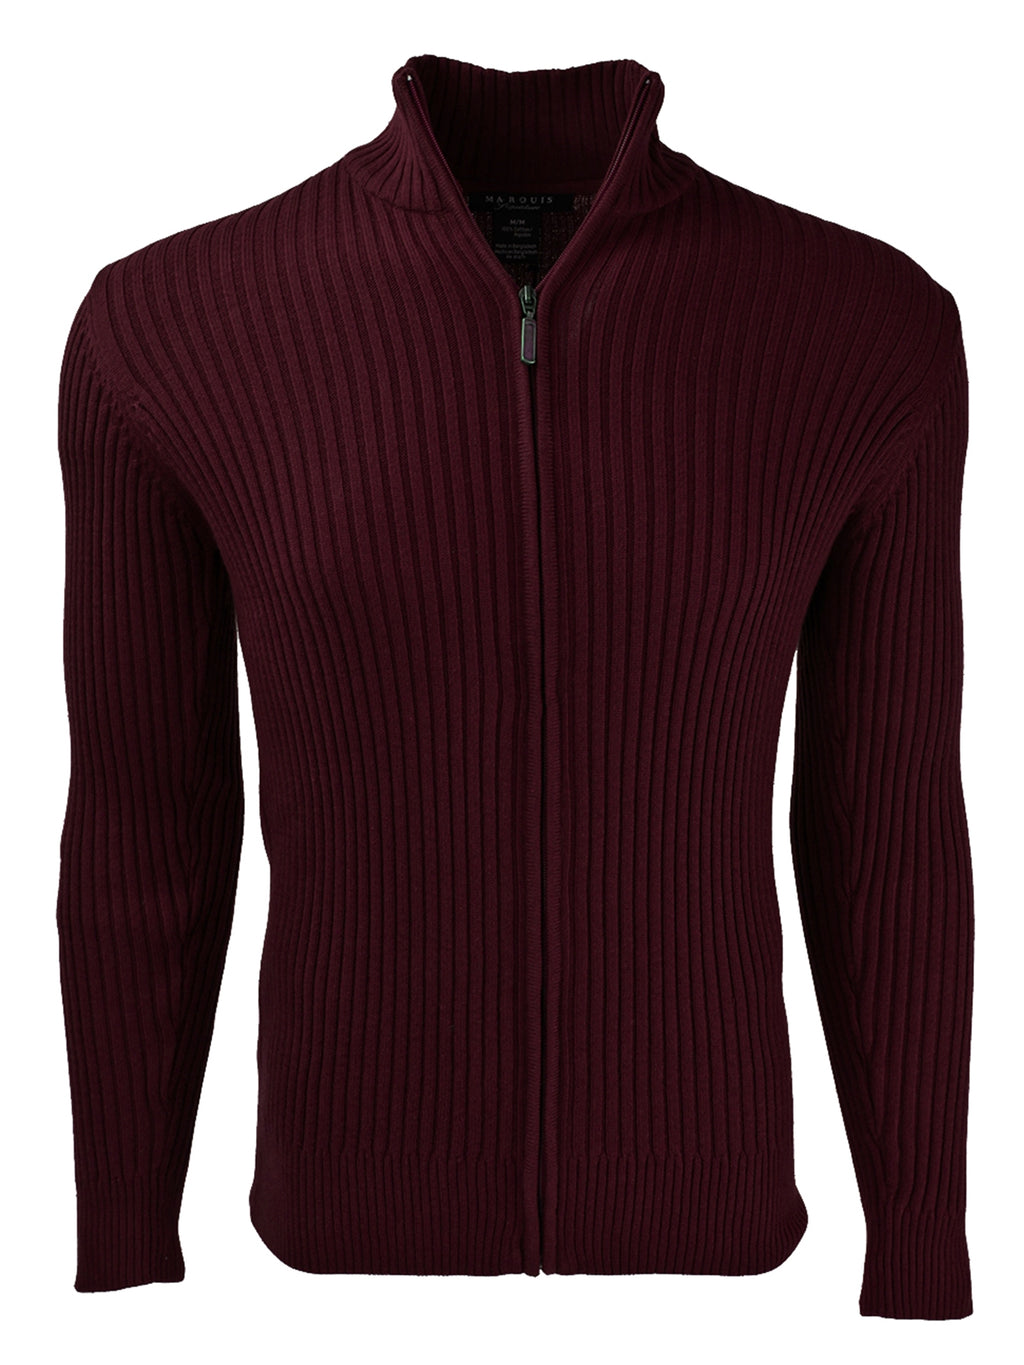 Full Zip Ribbed Mock Turtleneck Cotton Cardigan Sweater For Men Sweater TheDapperTie Burgundy Extra Small 